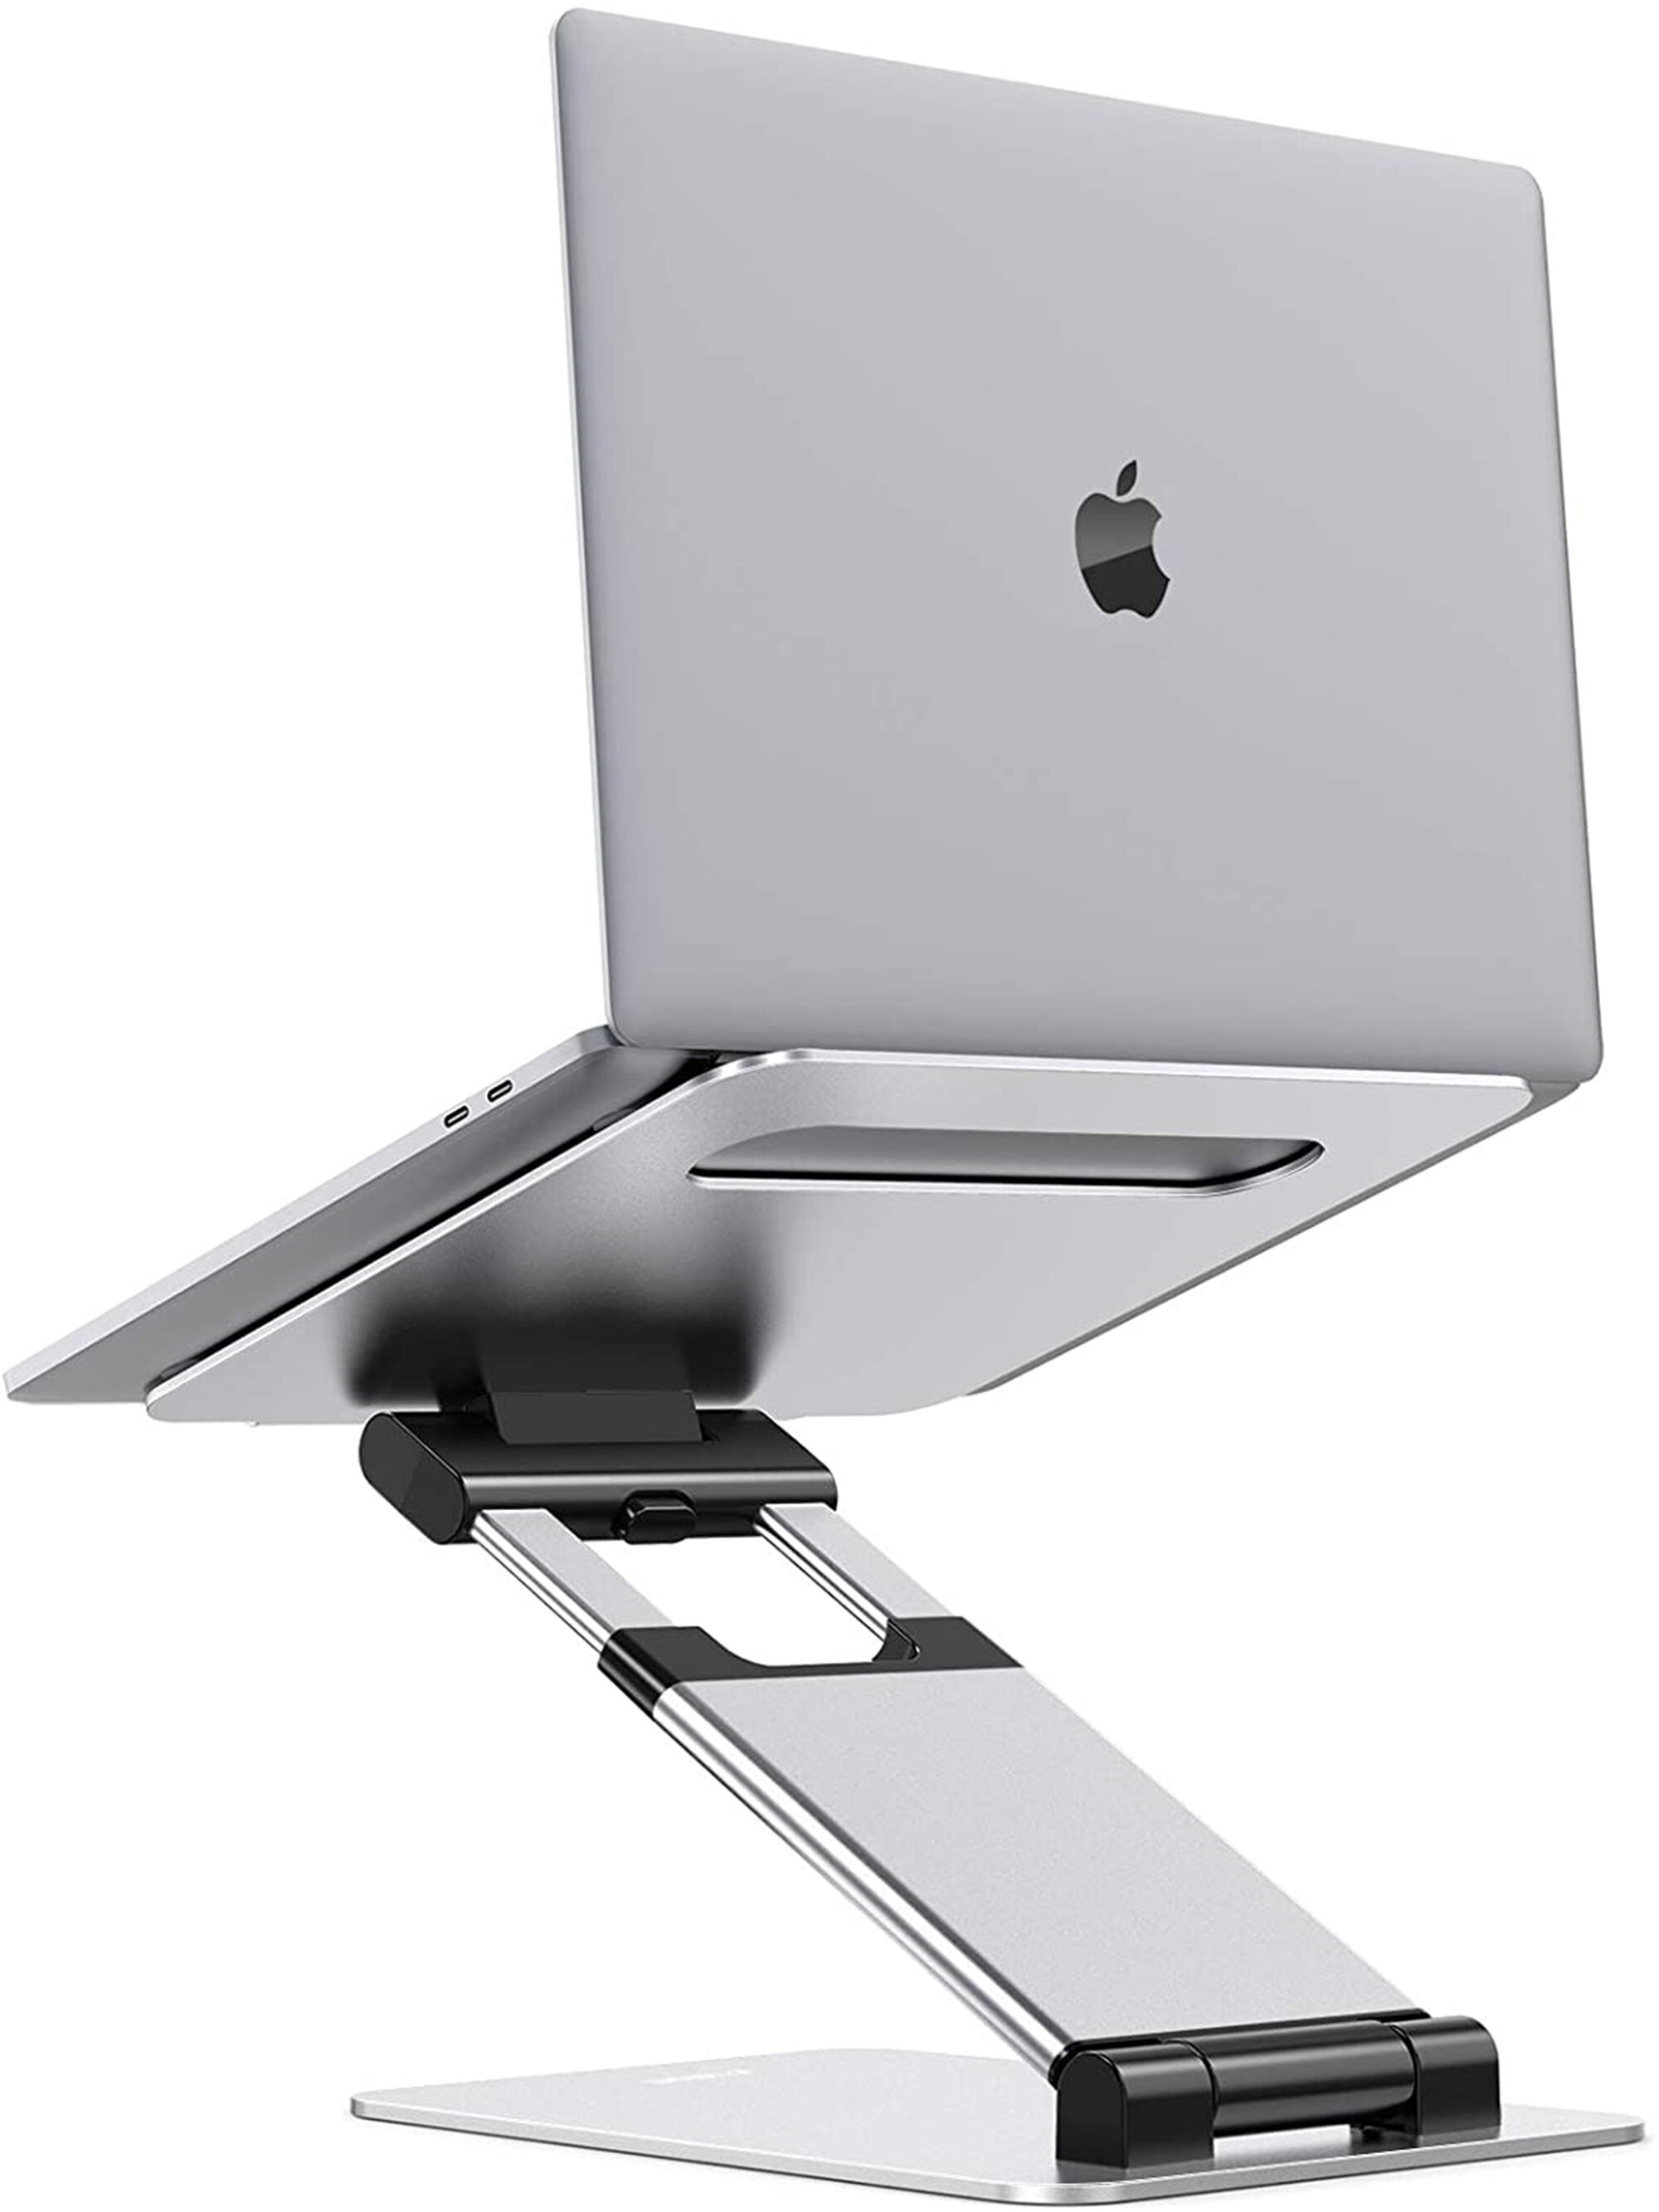 Color : Gray Portable Ergonomic Laptop Cooling Stand,Notebook Cooling Base with Fan,Suitable for Notebooks Within 11-17 Inches 